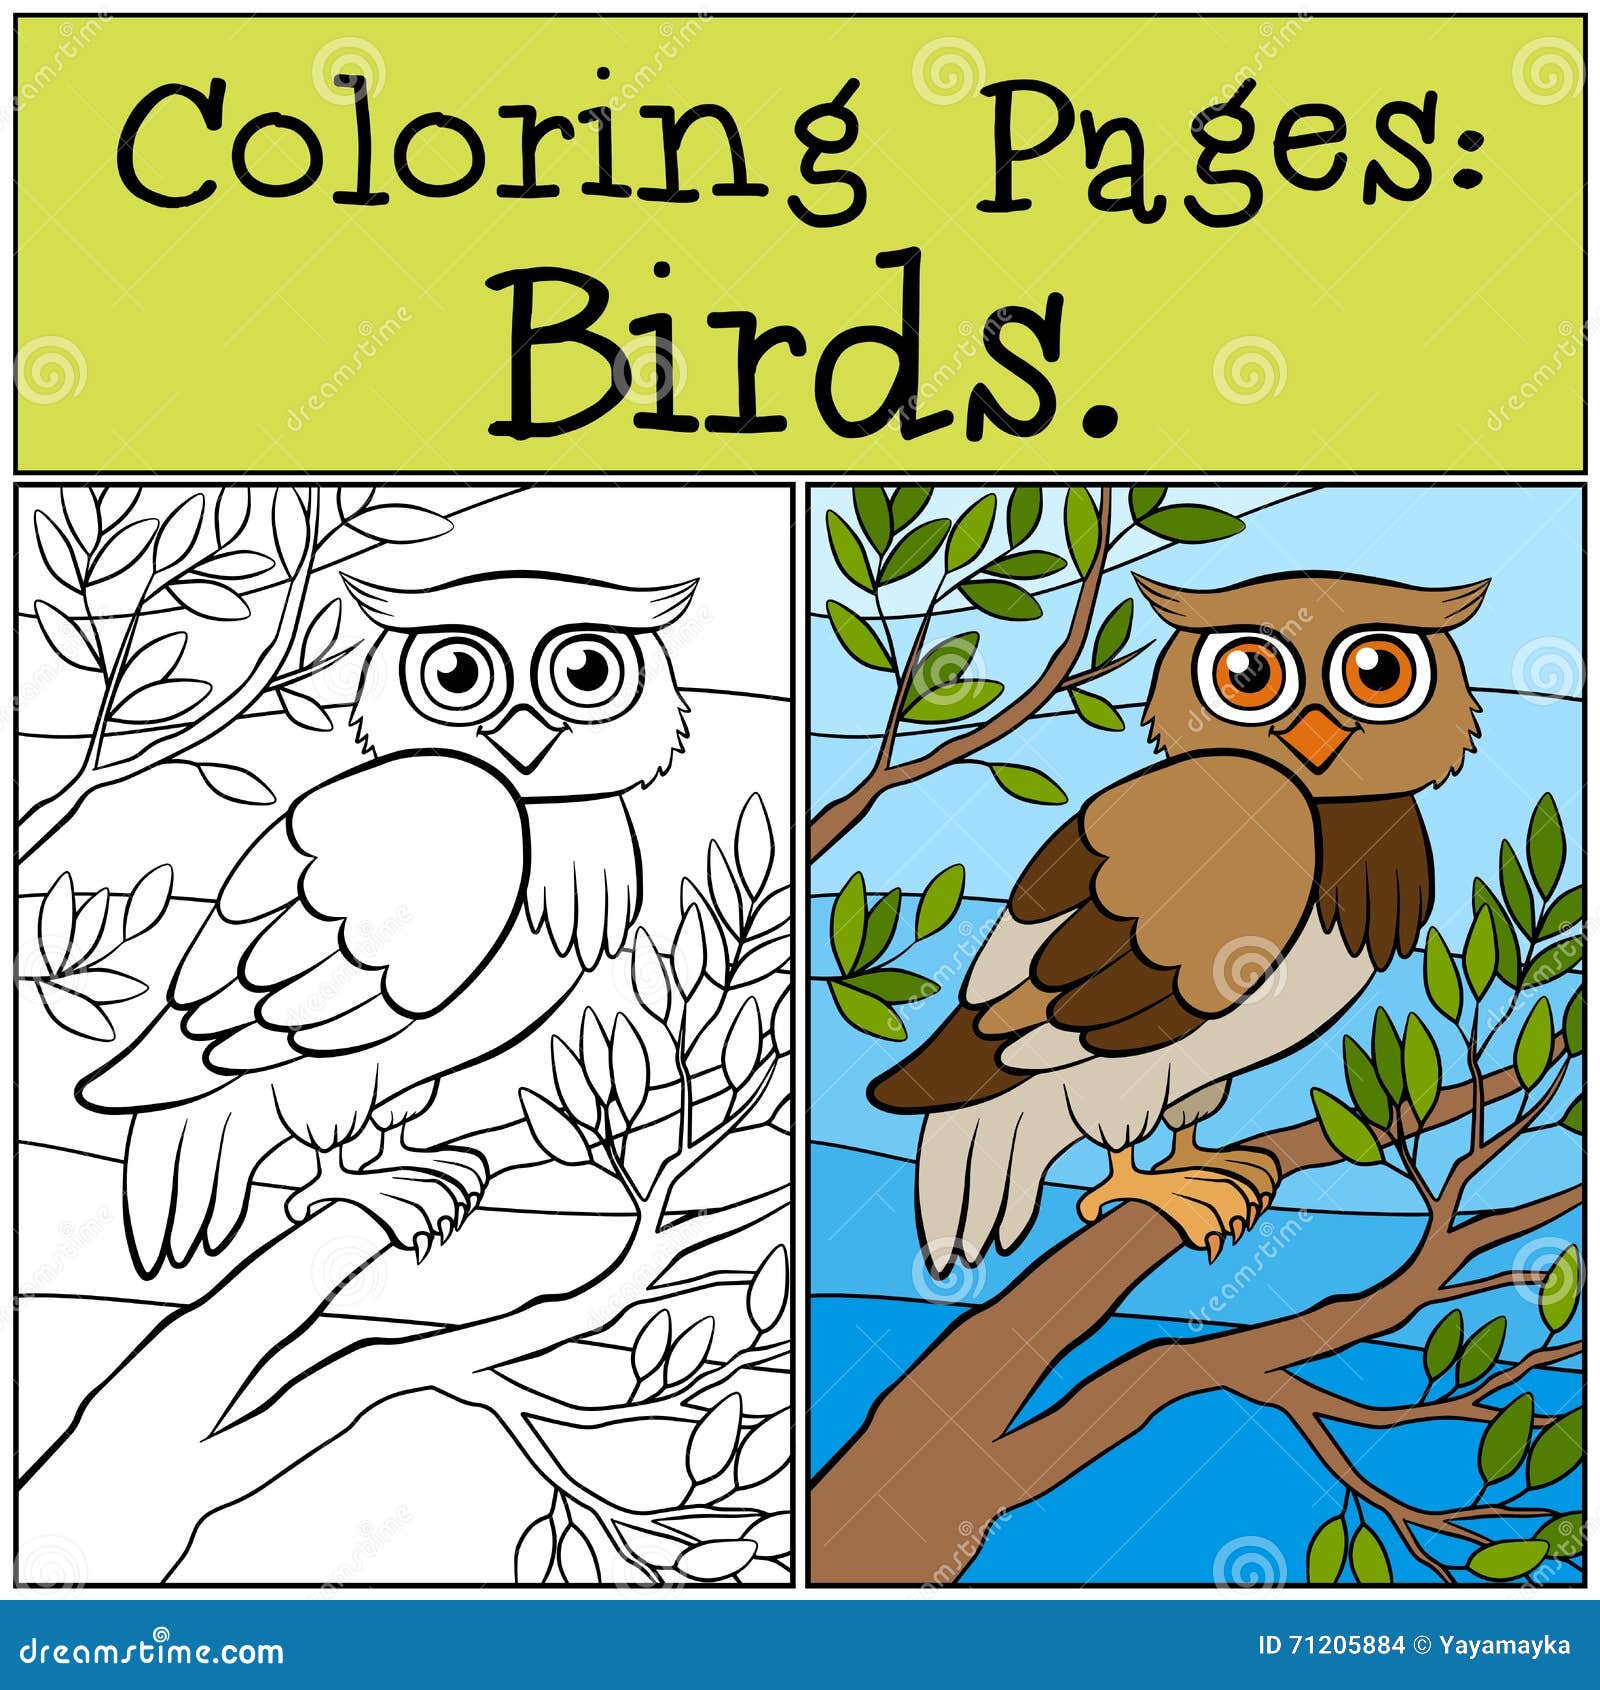 coloring pages: birds. little cute owl.